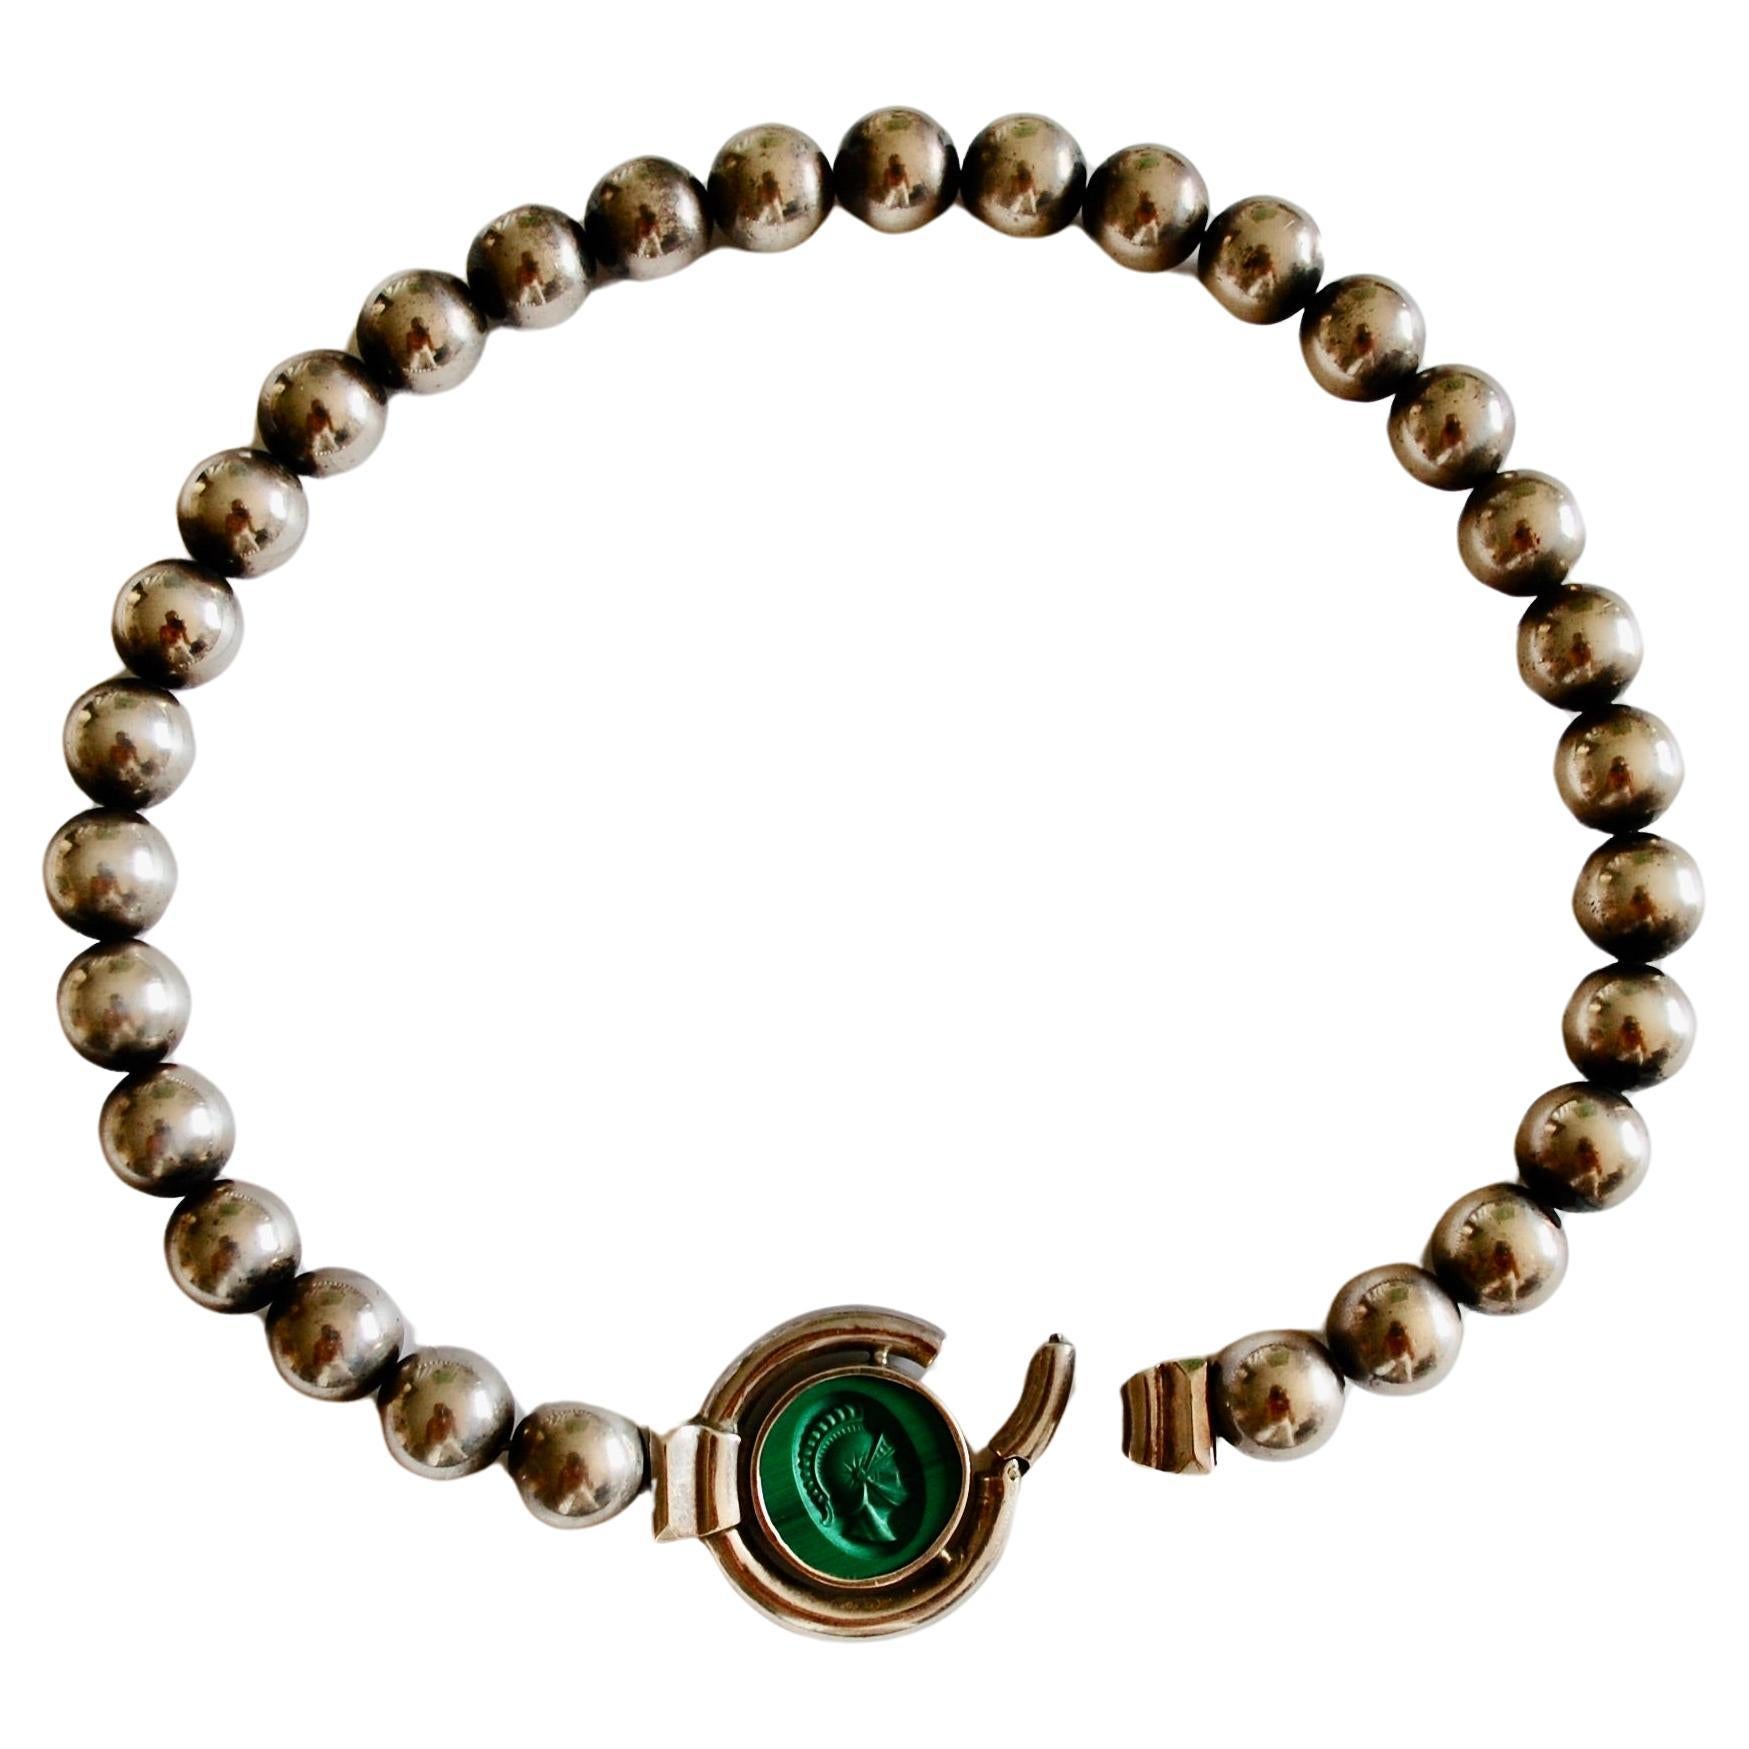 Classical Roman Vintage Italian Carved Malachite Sterling Necklace  For Sale